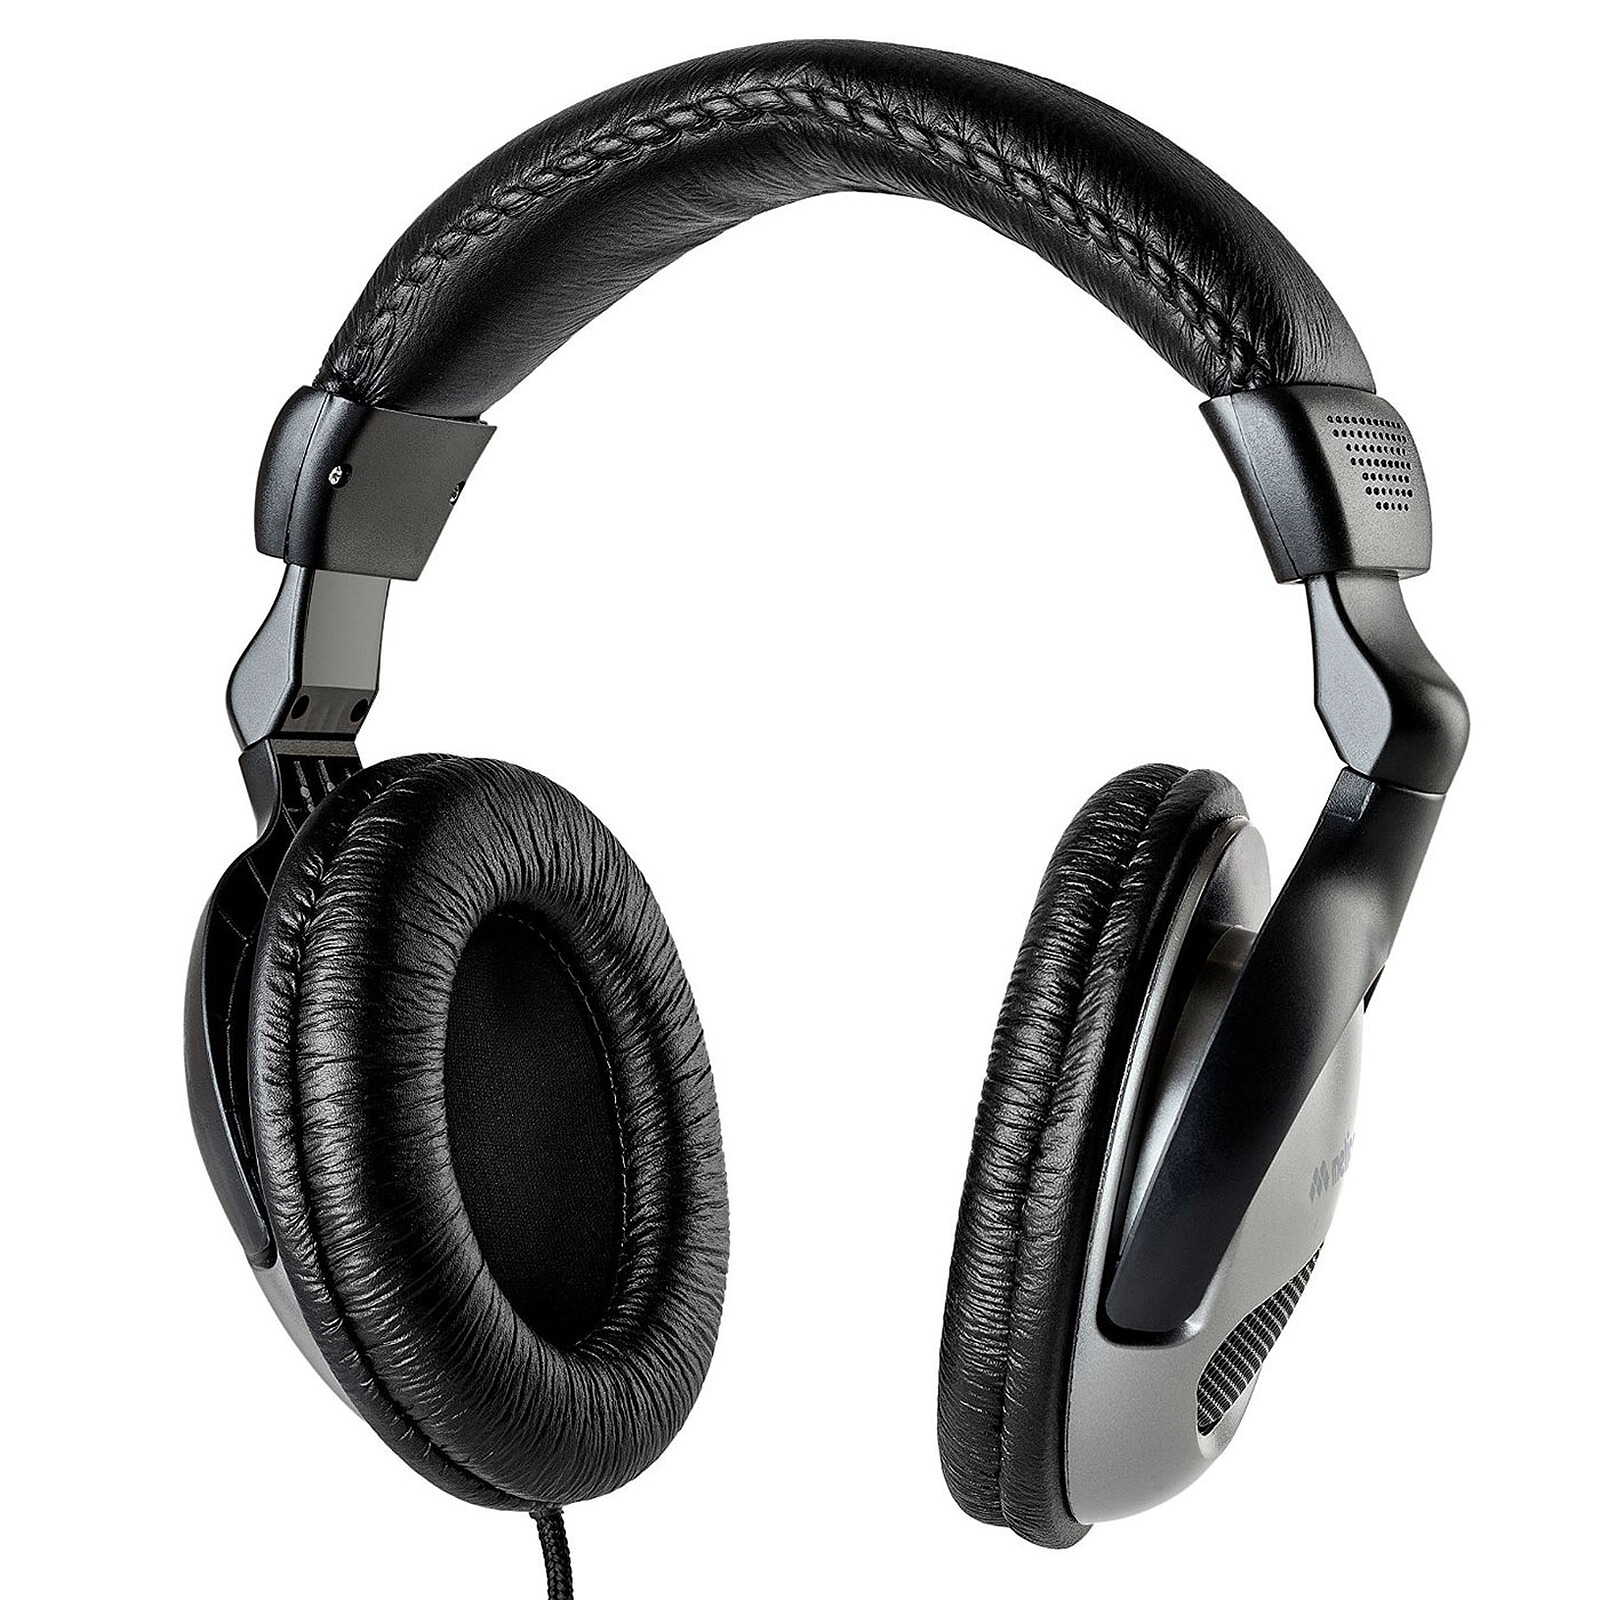 Nothing Ear (2) Blanco - Auriculares - LDLC